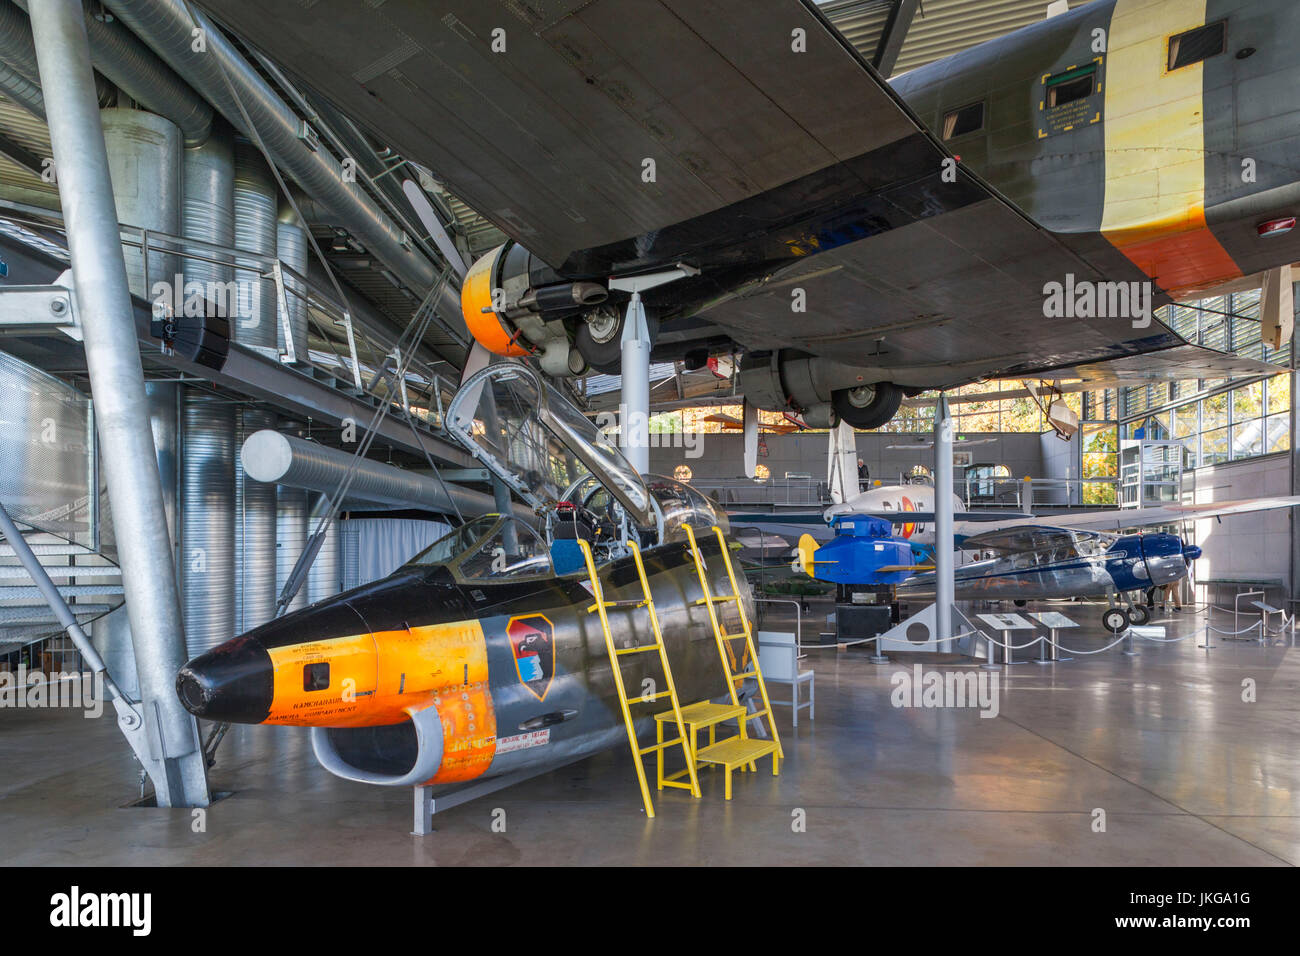 Germany, Bavaria, Munich - Oberschleissheim, Deutsches Museum Aviation Collection, housed at former NATO airfield, Fiat G-91 jete fighter and DC-3 transport Stock Photo